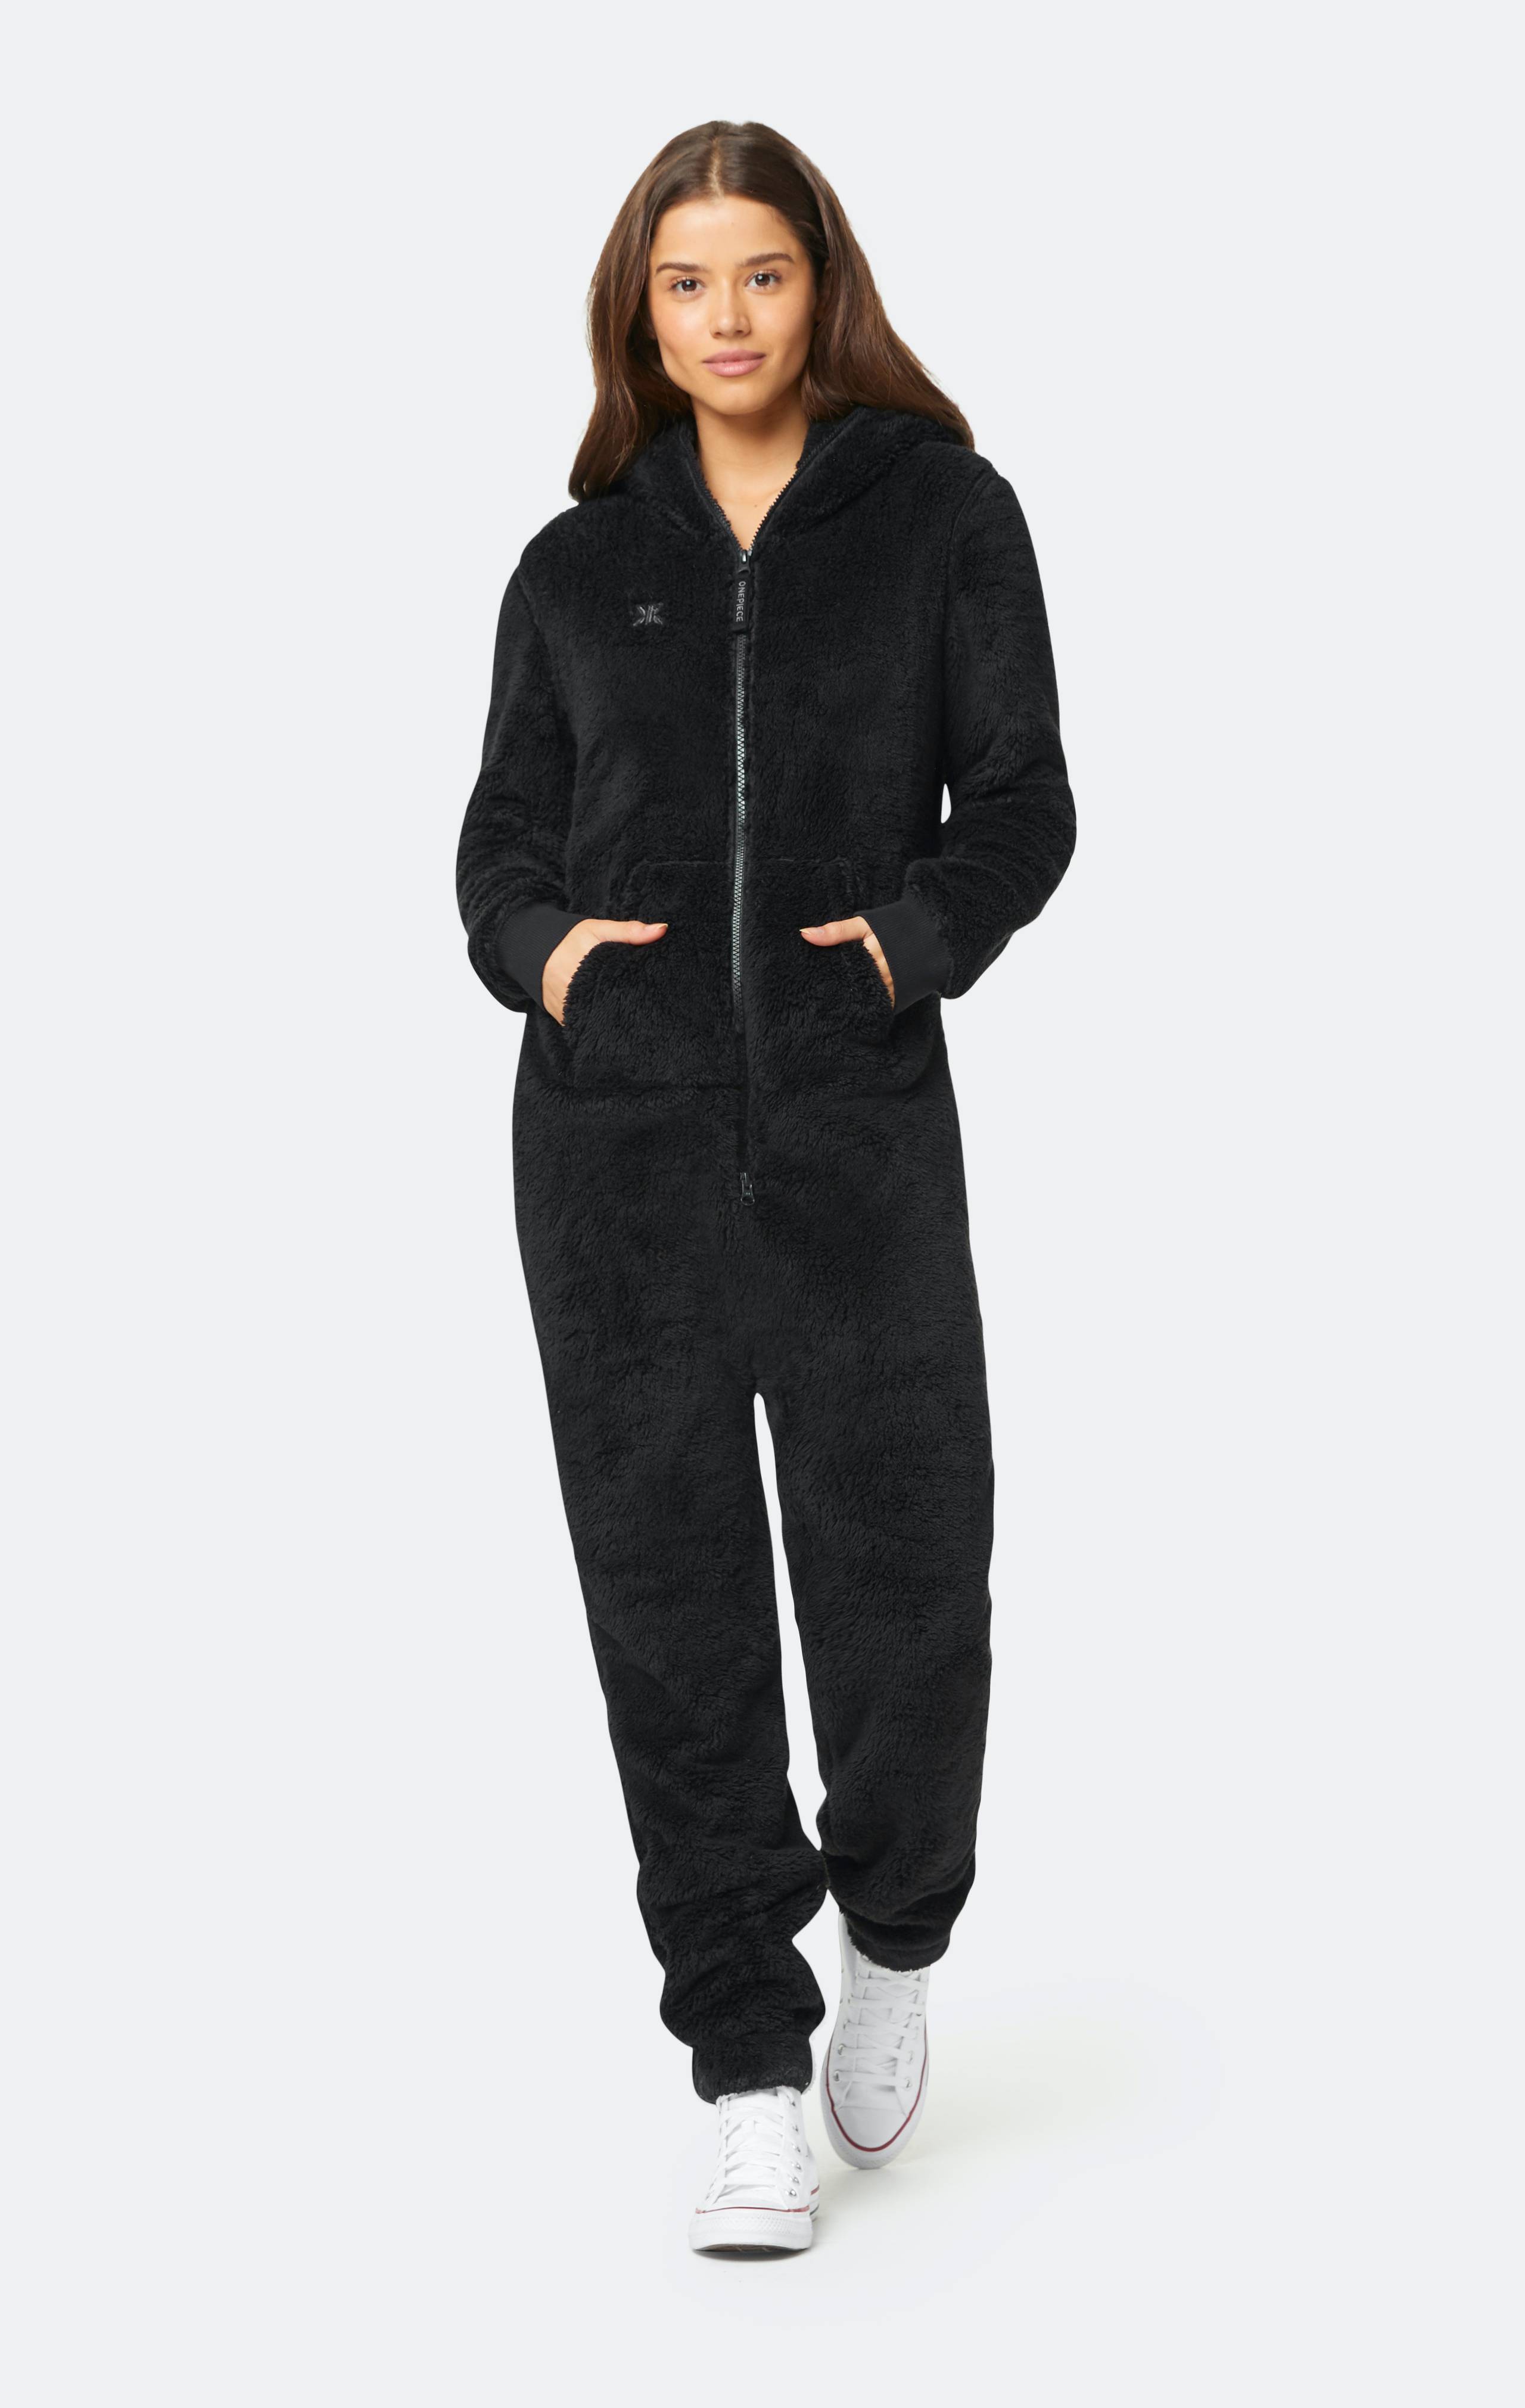 Onepiece The New Puppy Jumpsuit Black - 5